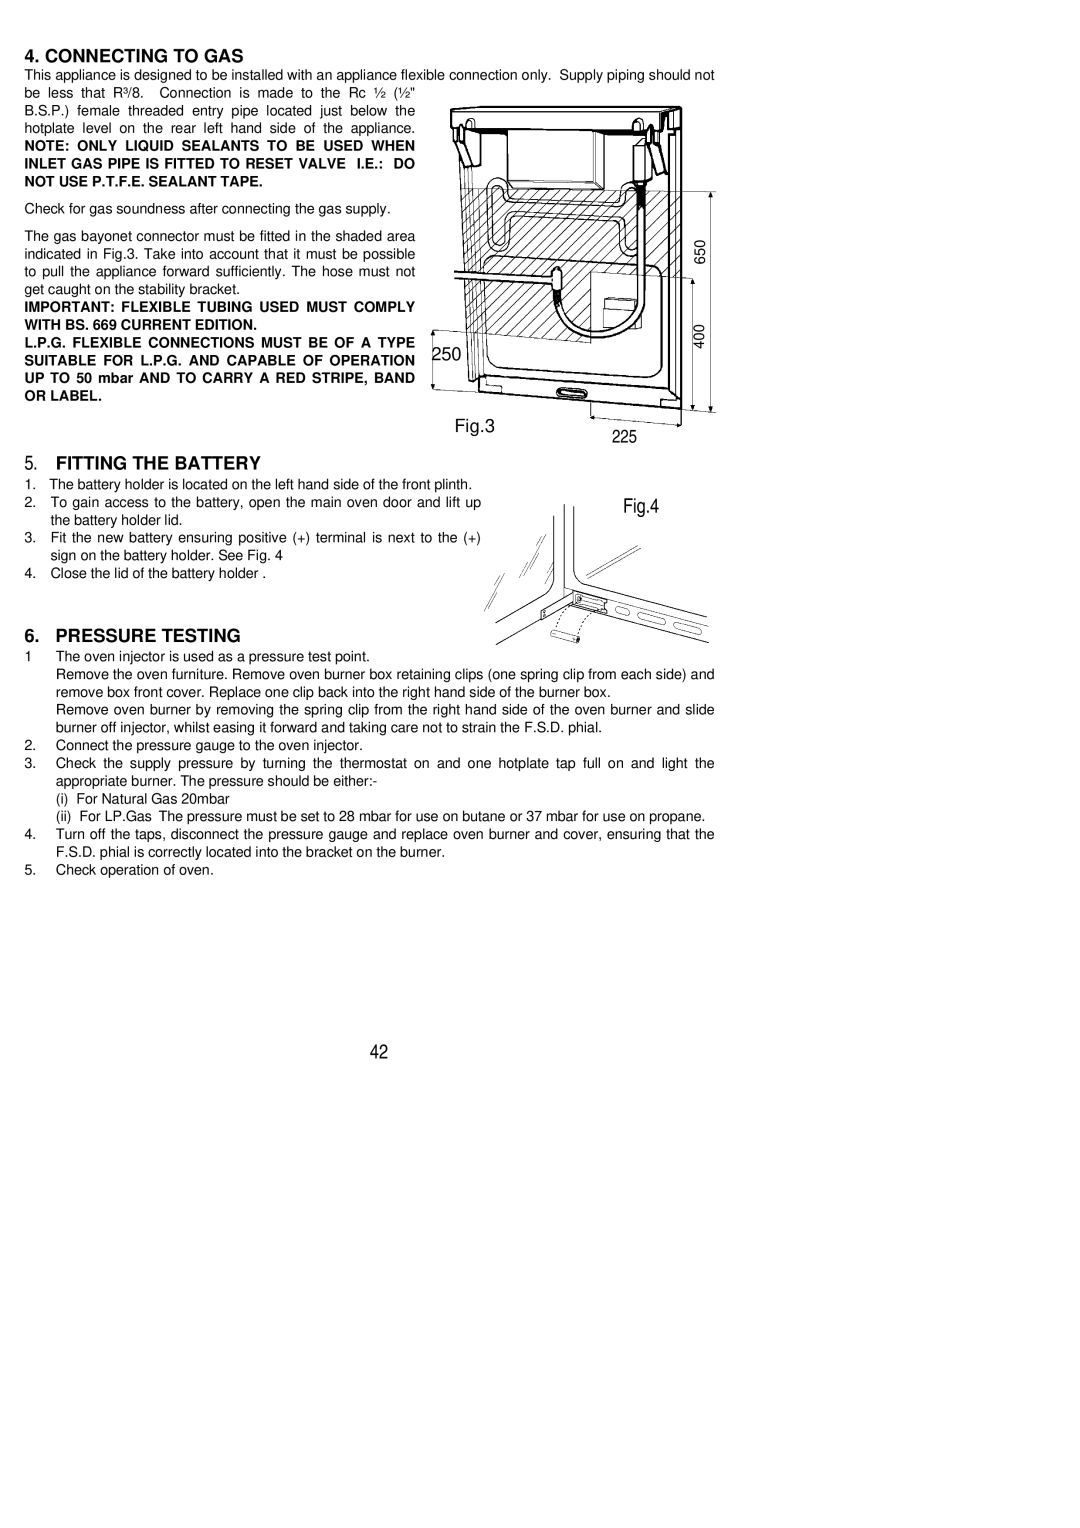 Electrolux SIG 401 installation instructions Connecting to GAS, Fitting the Battery, Pressure Testing 